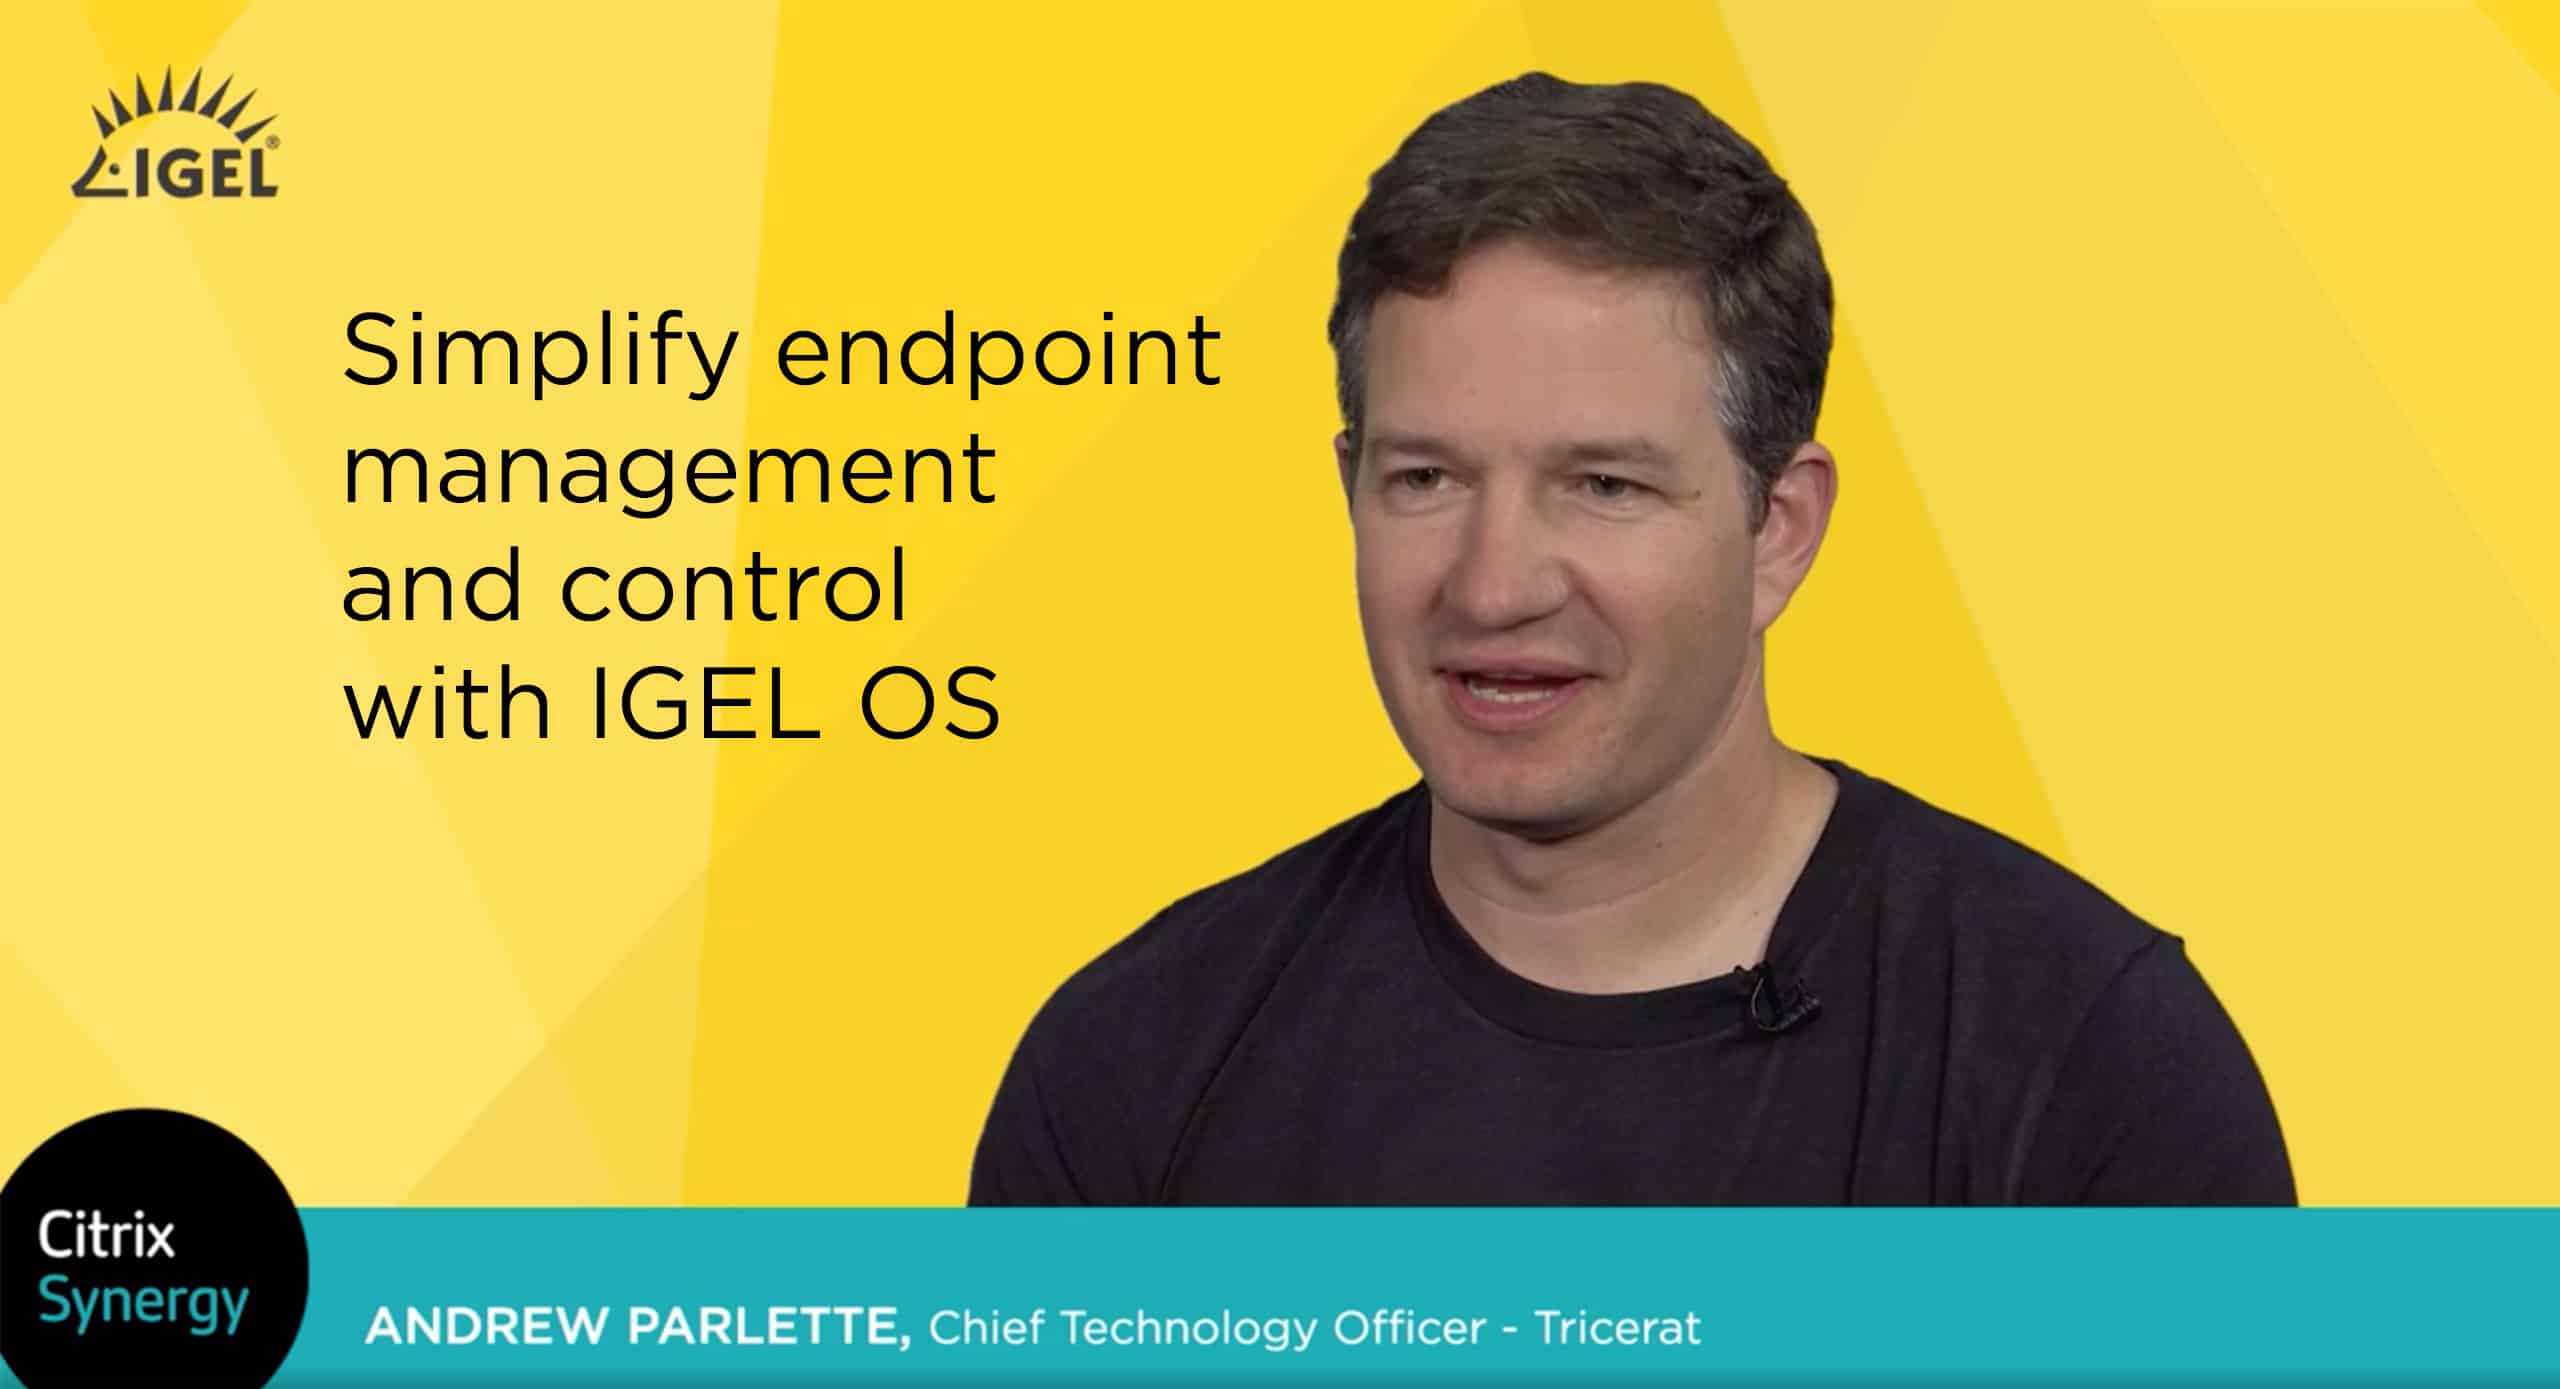 Simplify endpoint management and control with IGEL OS